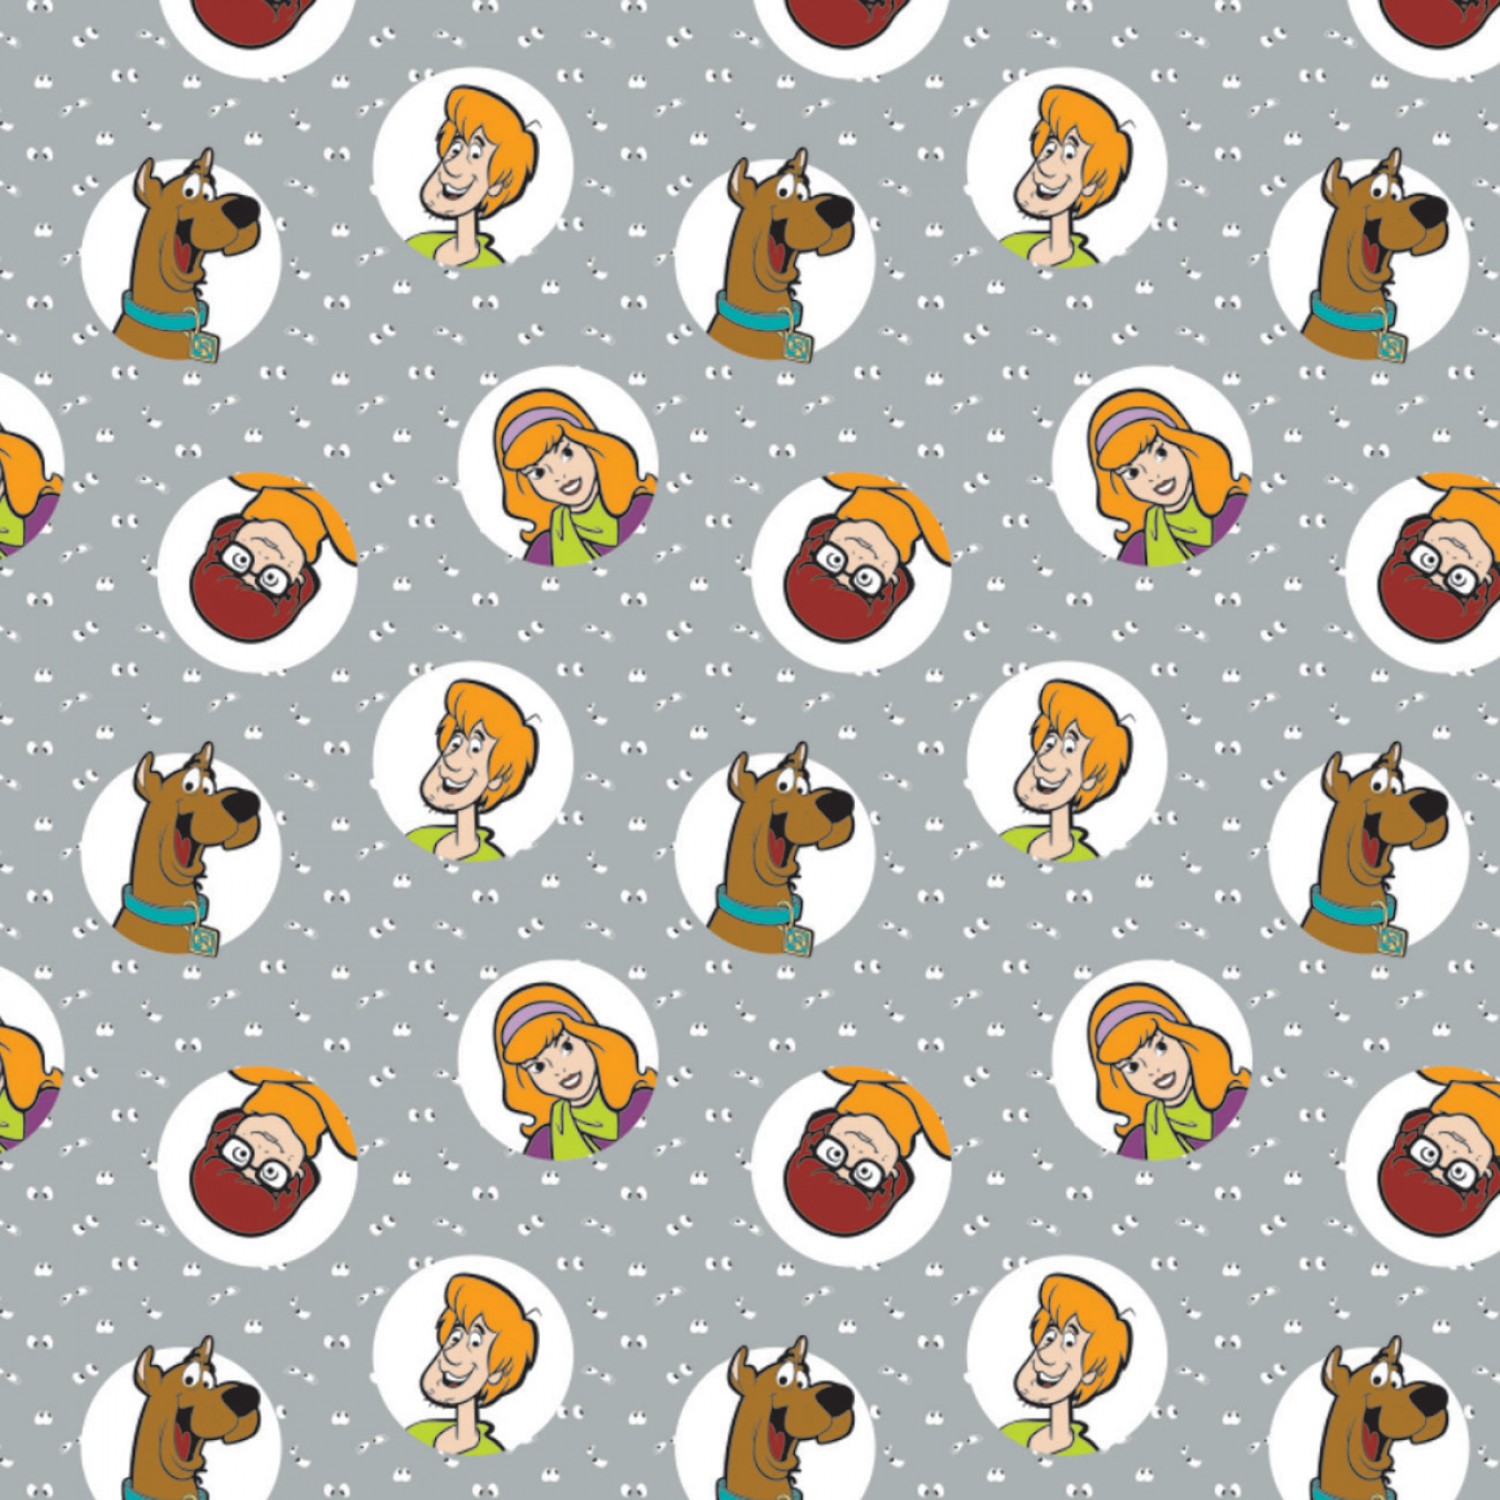 Scooby Doo and the Gang Fabric - Grey